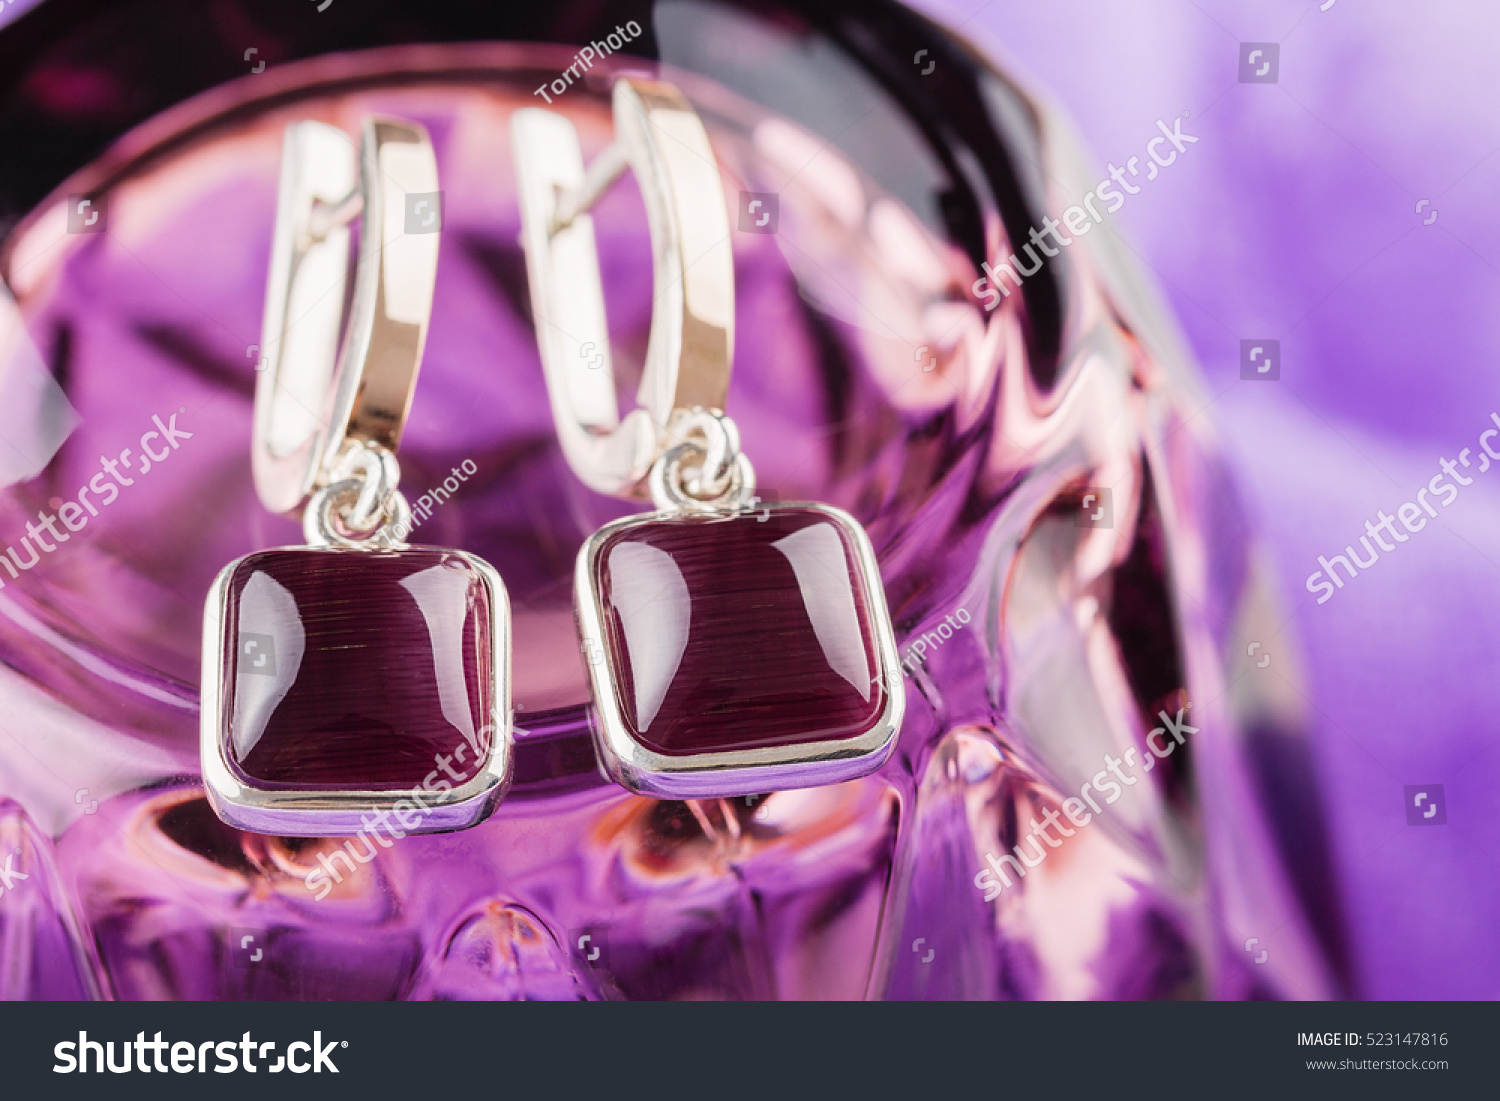 https://www.shutterstock.com/pic-523147816/stock-photo-gold-ring-square-shaped-with-purple-gemstones-on-violet-background.html